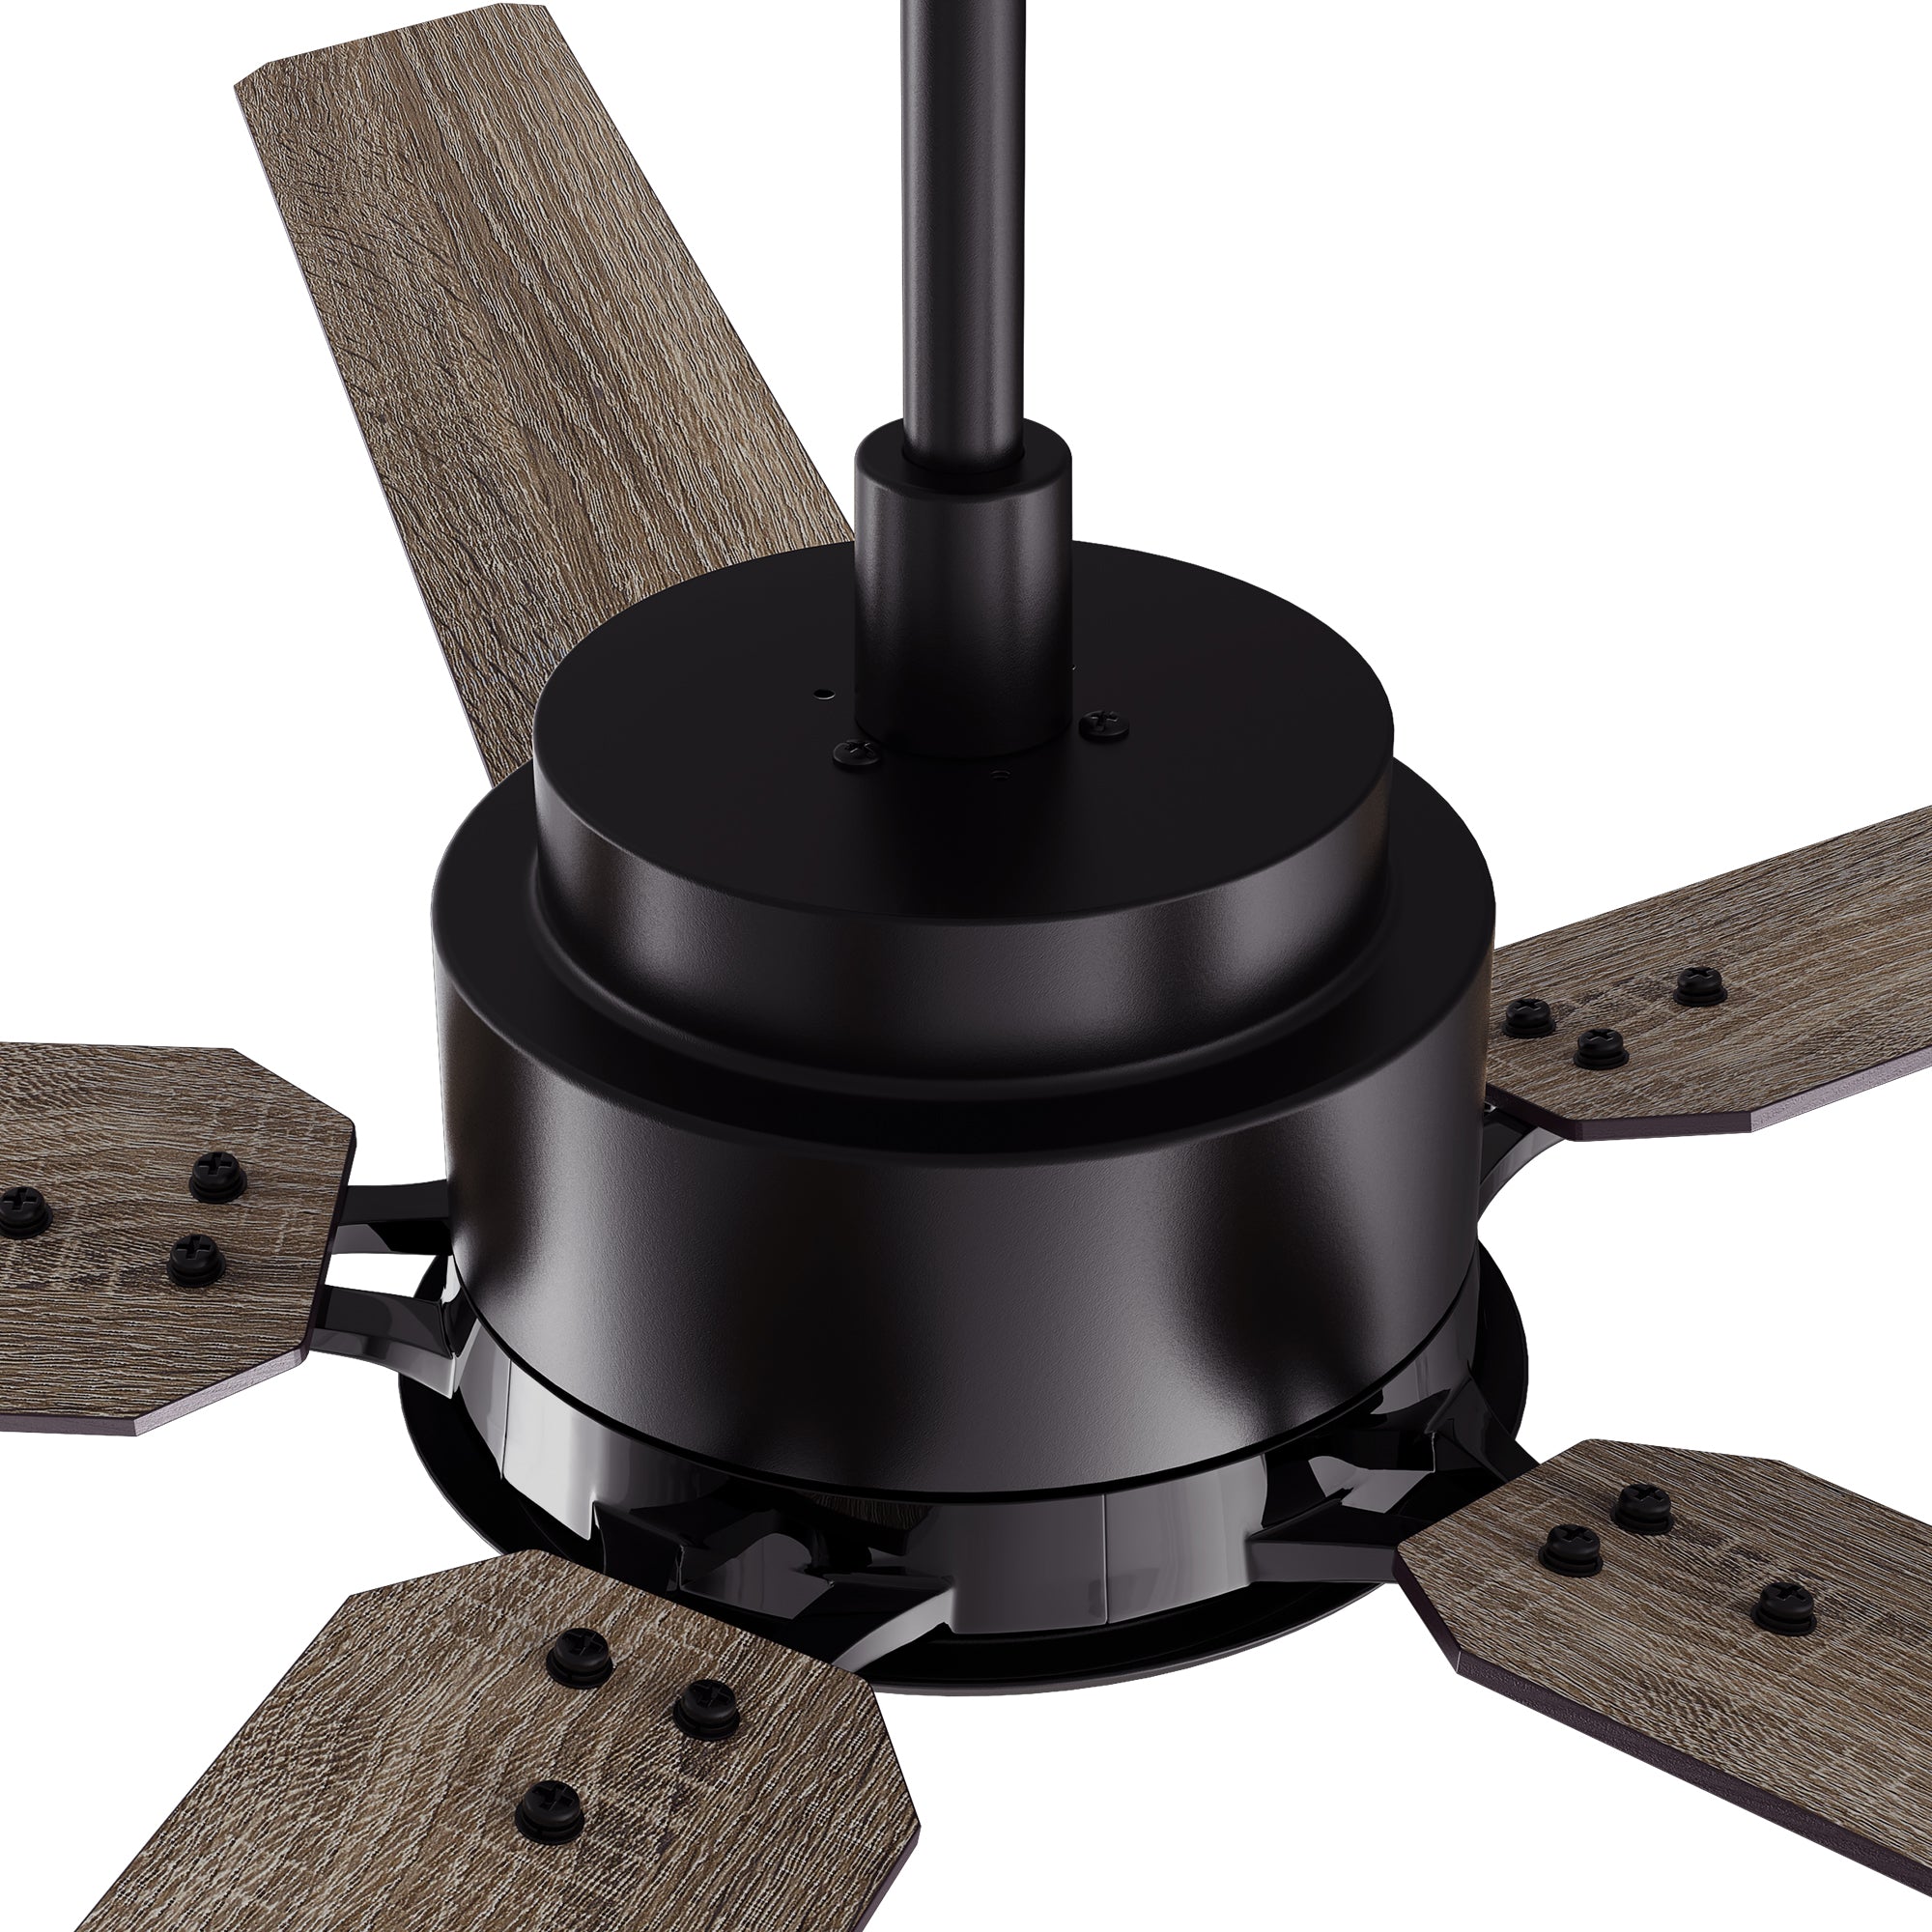 This Kyra 60&quot; ceiling fan keeps your space cool, bright, and stylish. It is a soft modern masterpiece perfect for your large indoor living spaces. This ceiling fan is a simplicity designing with Black finish, use elegant Plywood blades and has an integrated 4000K LED cool light. The fan features Remote control to set fan preferences. 